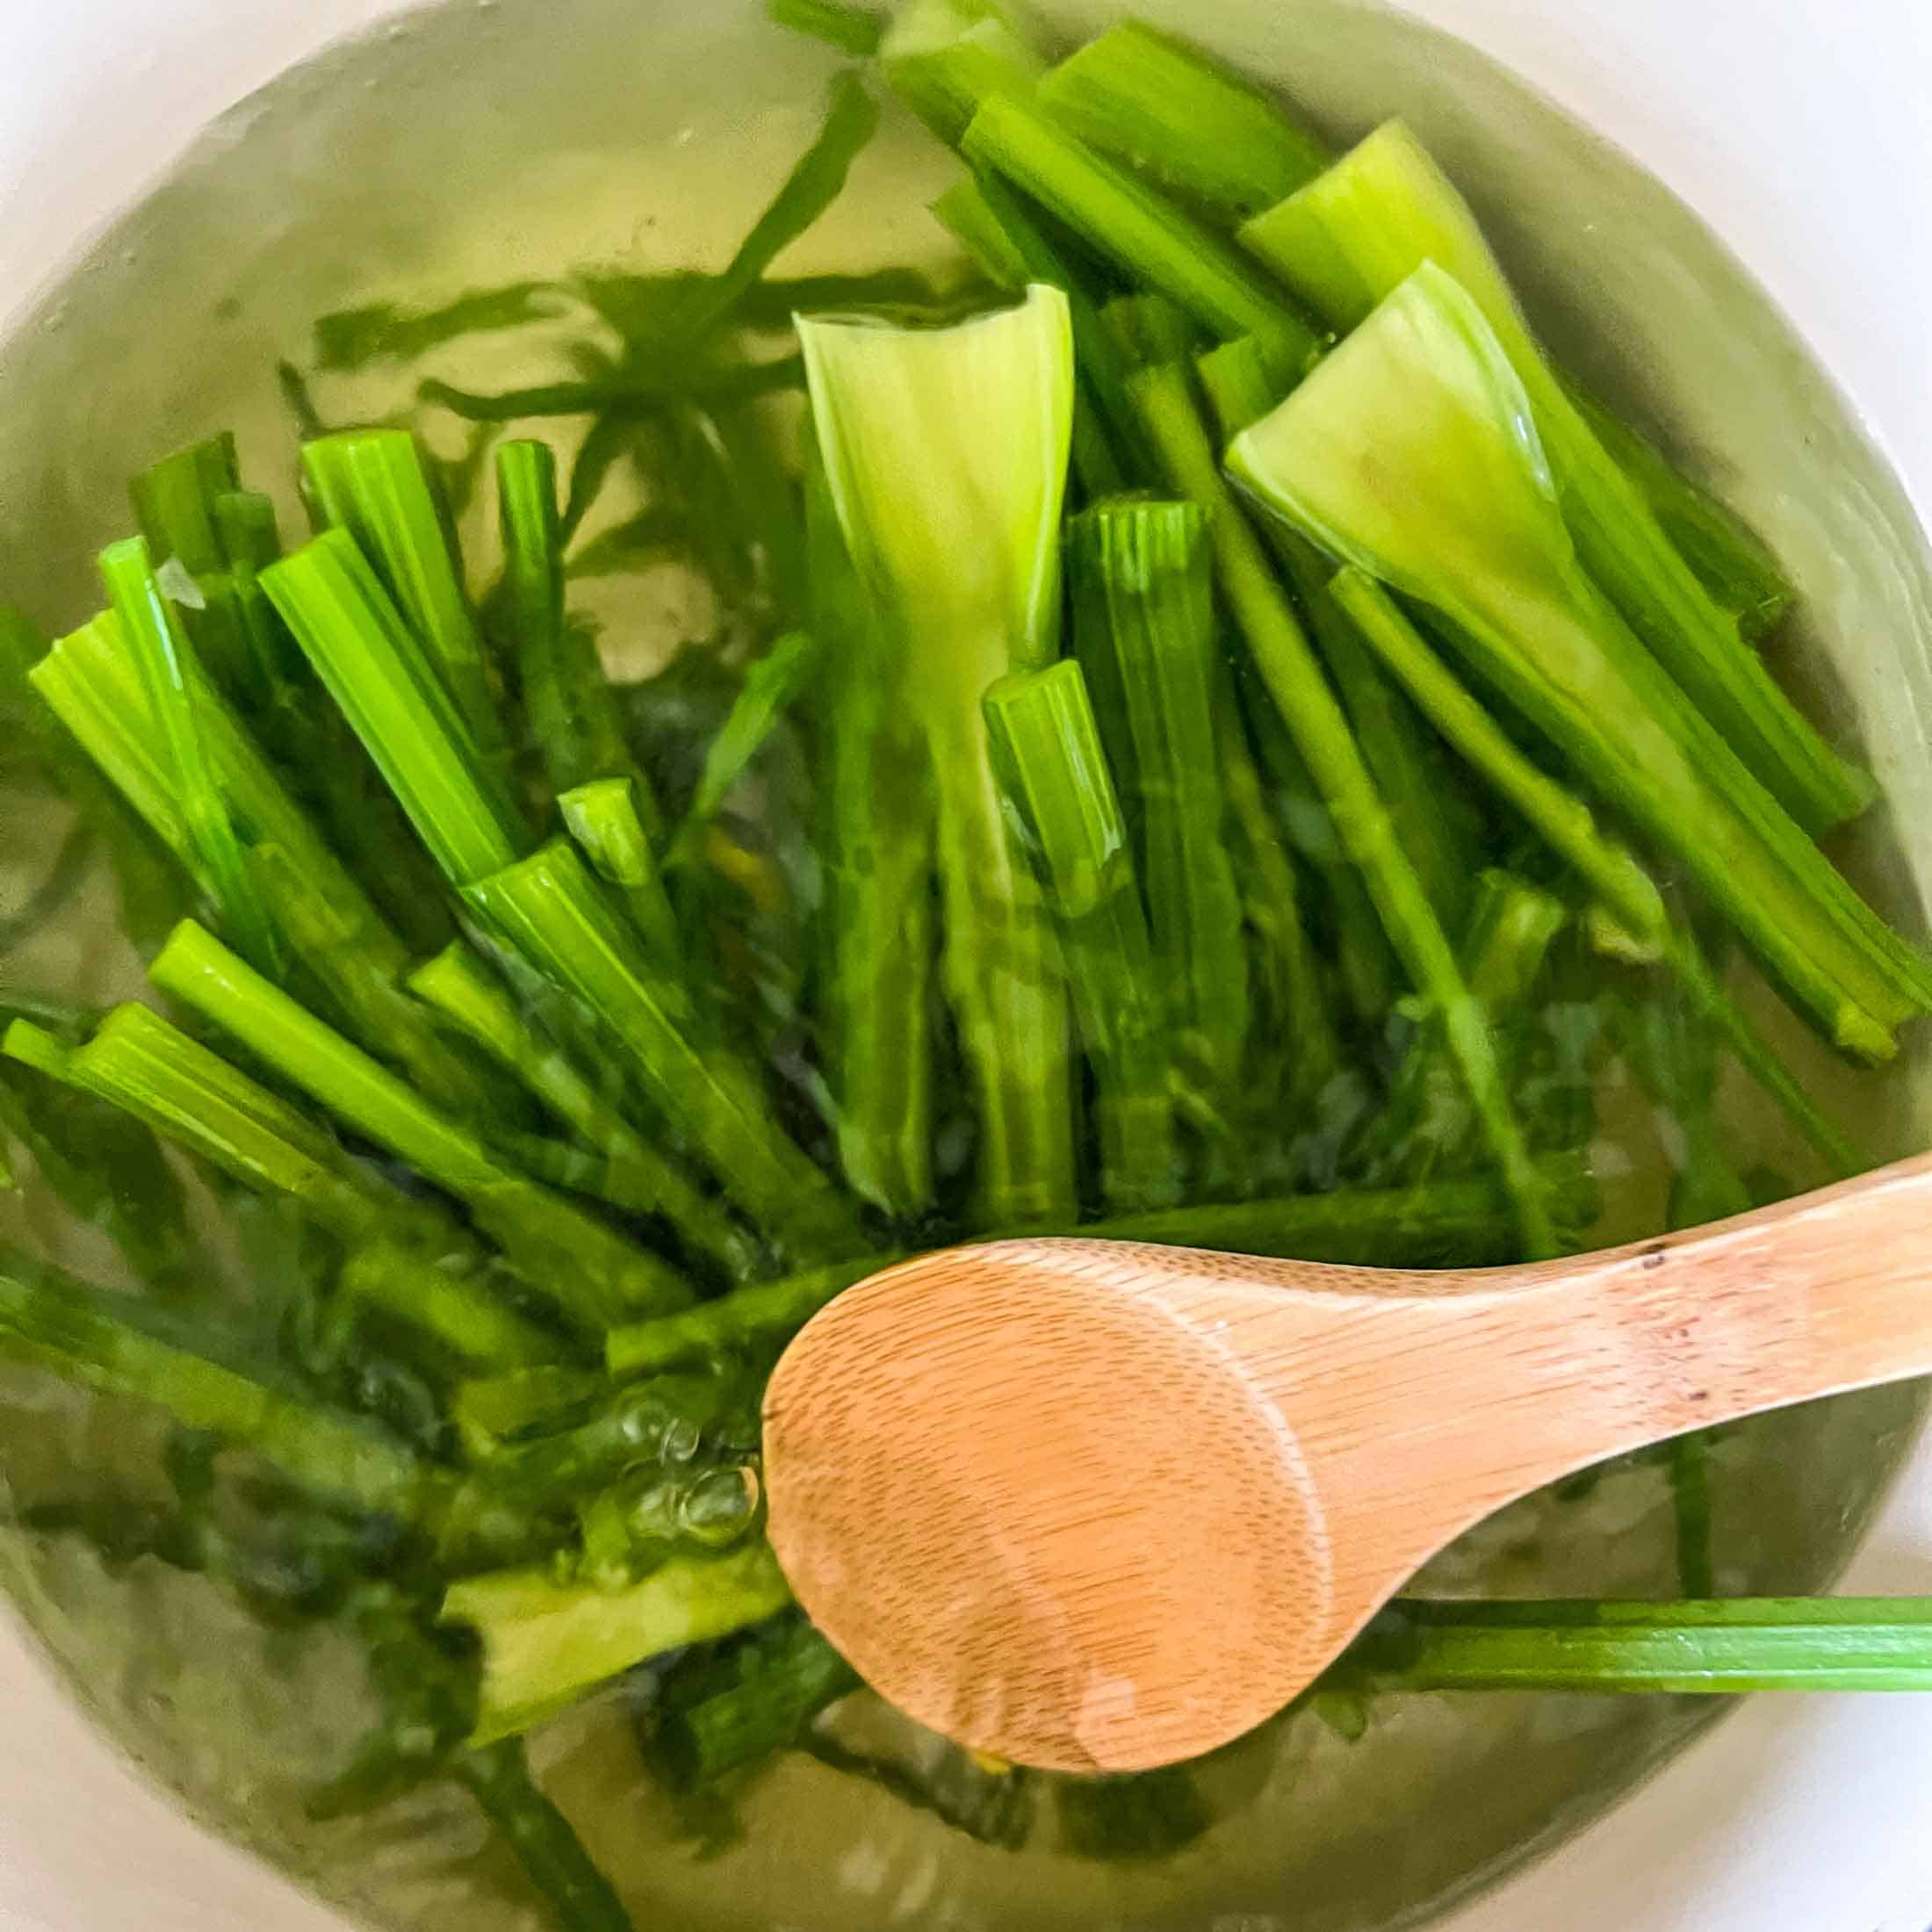 Celery stalks in a large pot filled with boiling water.